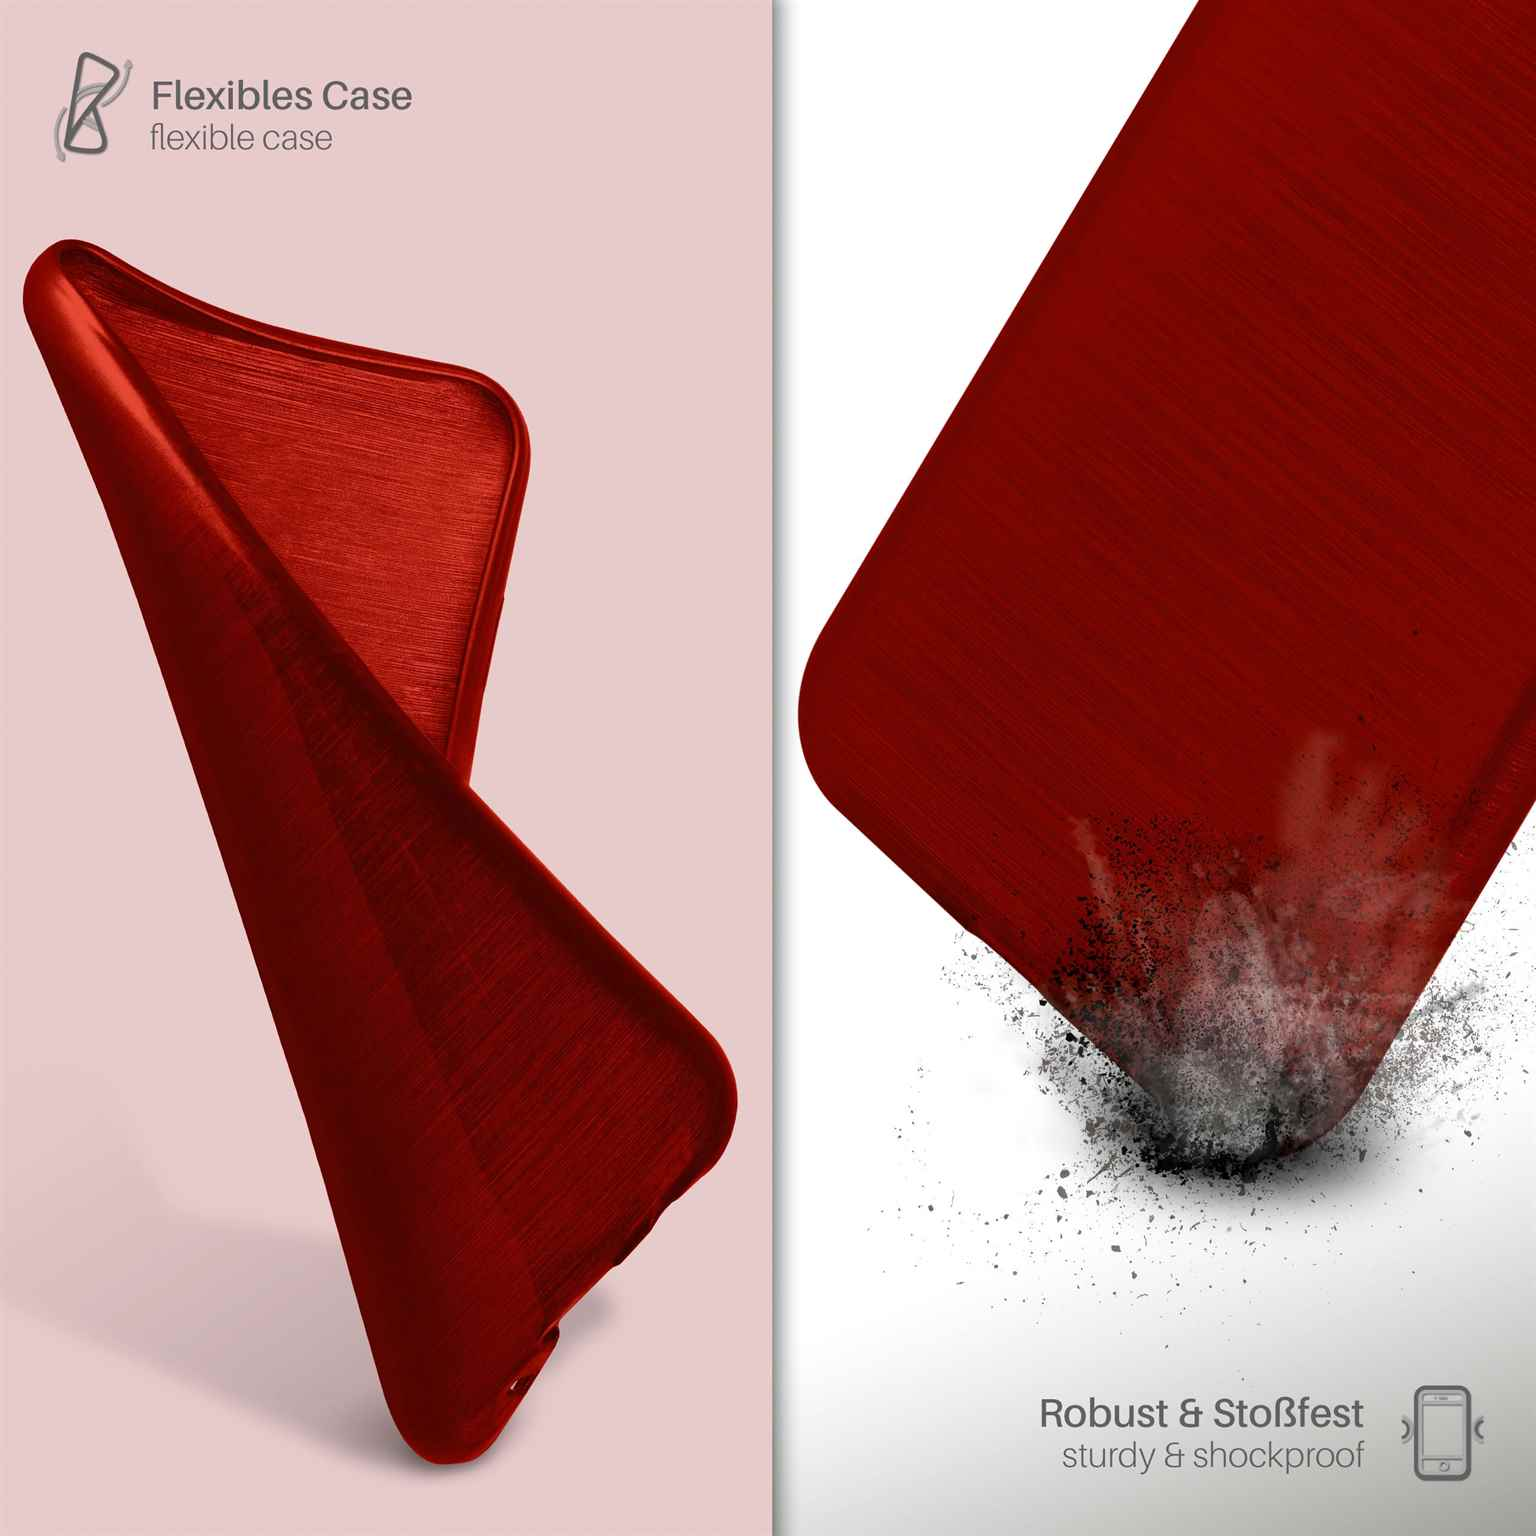 MOEX Brushed Crimson-Red Apple, 4S, Case, iPhone Backcover